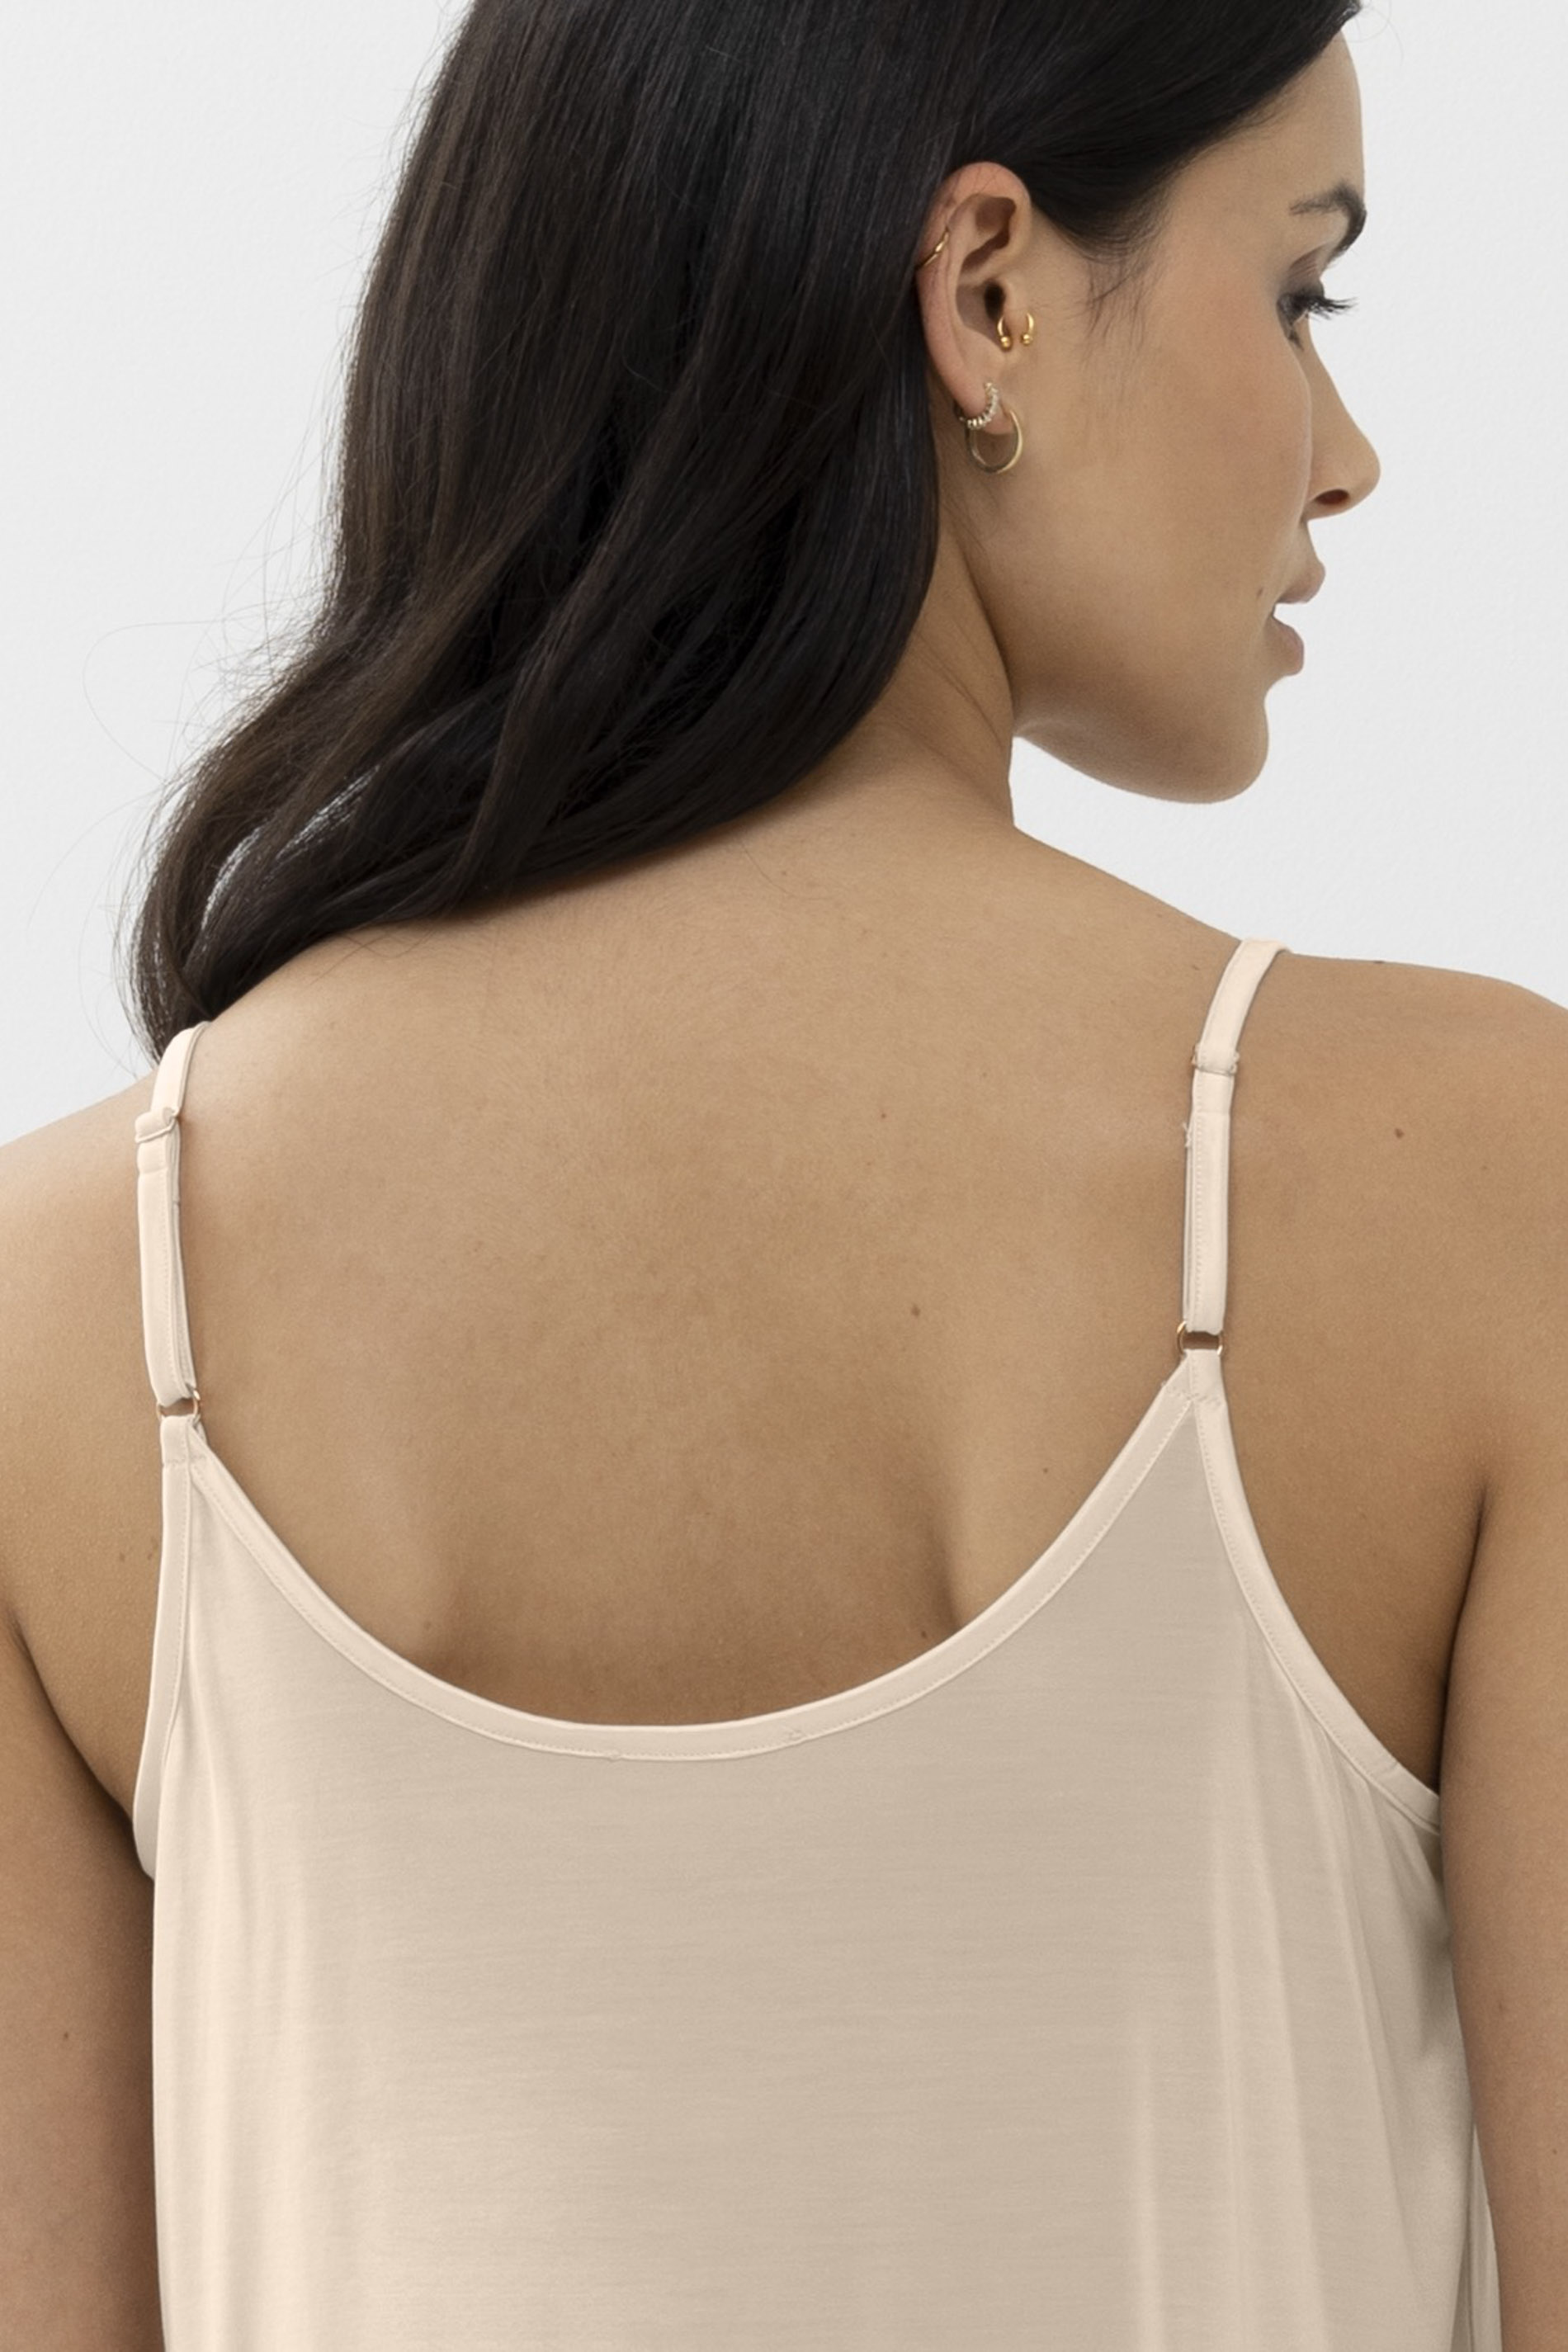 Camisole Serie Coco Detail View 02 | mey®